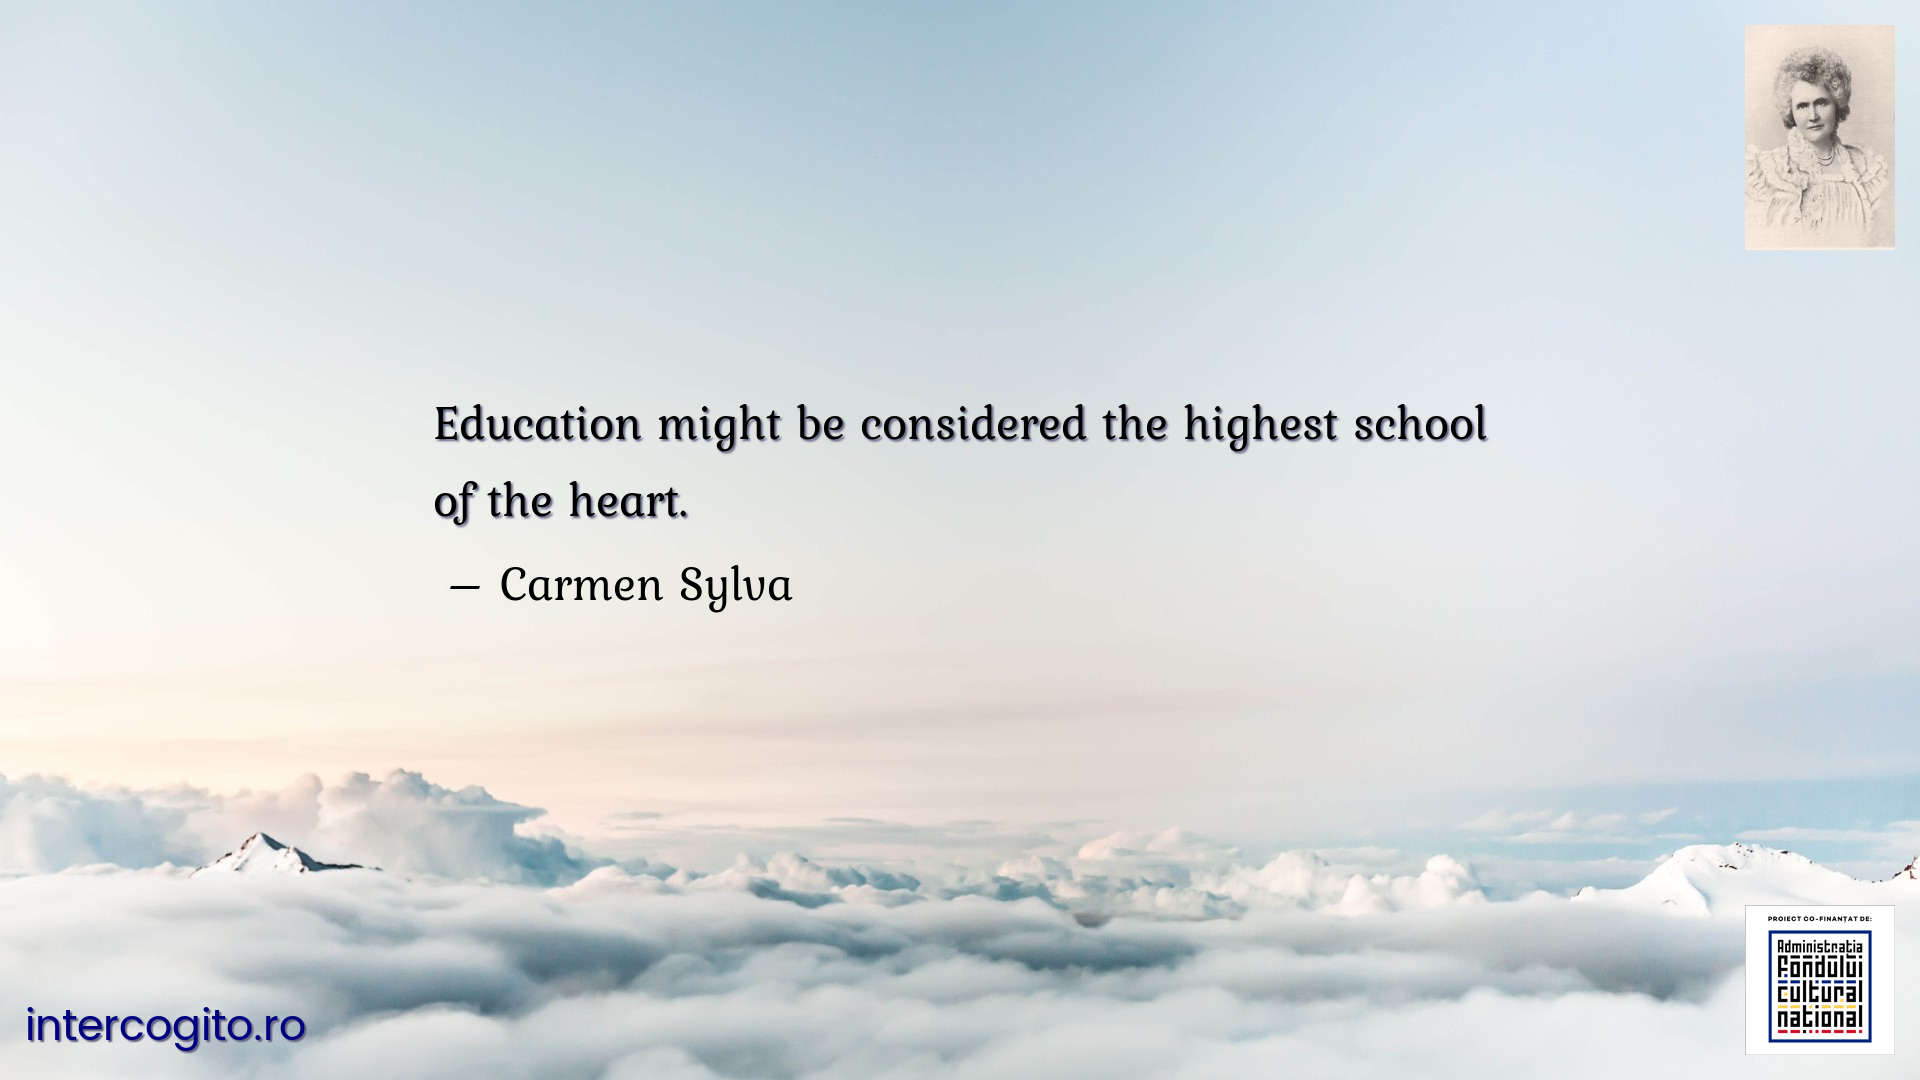 Education might be considered the highest school of the heart.